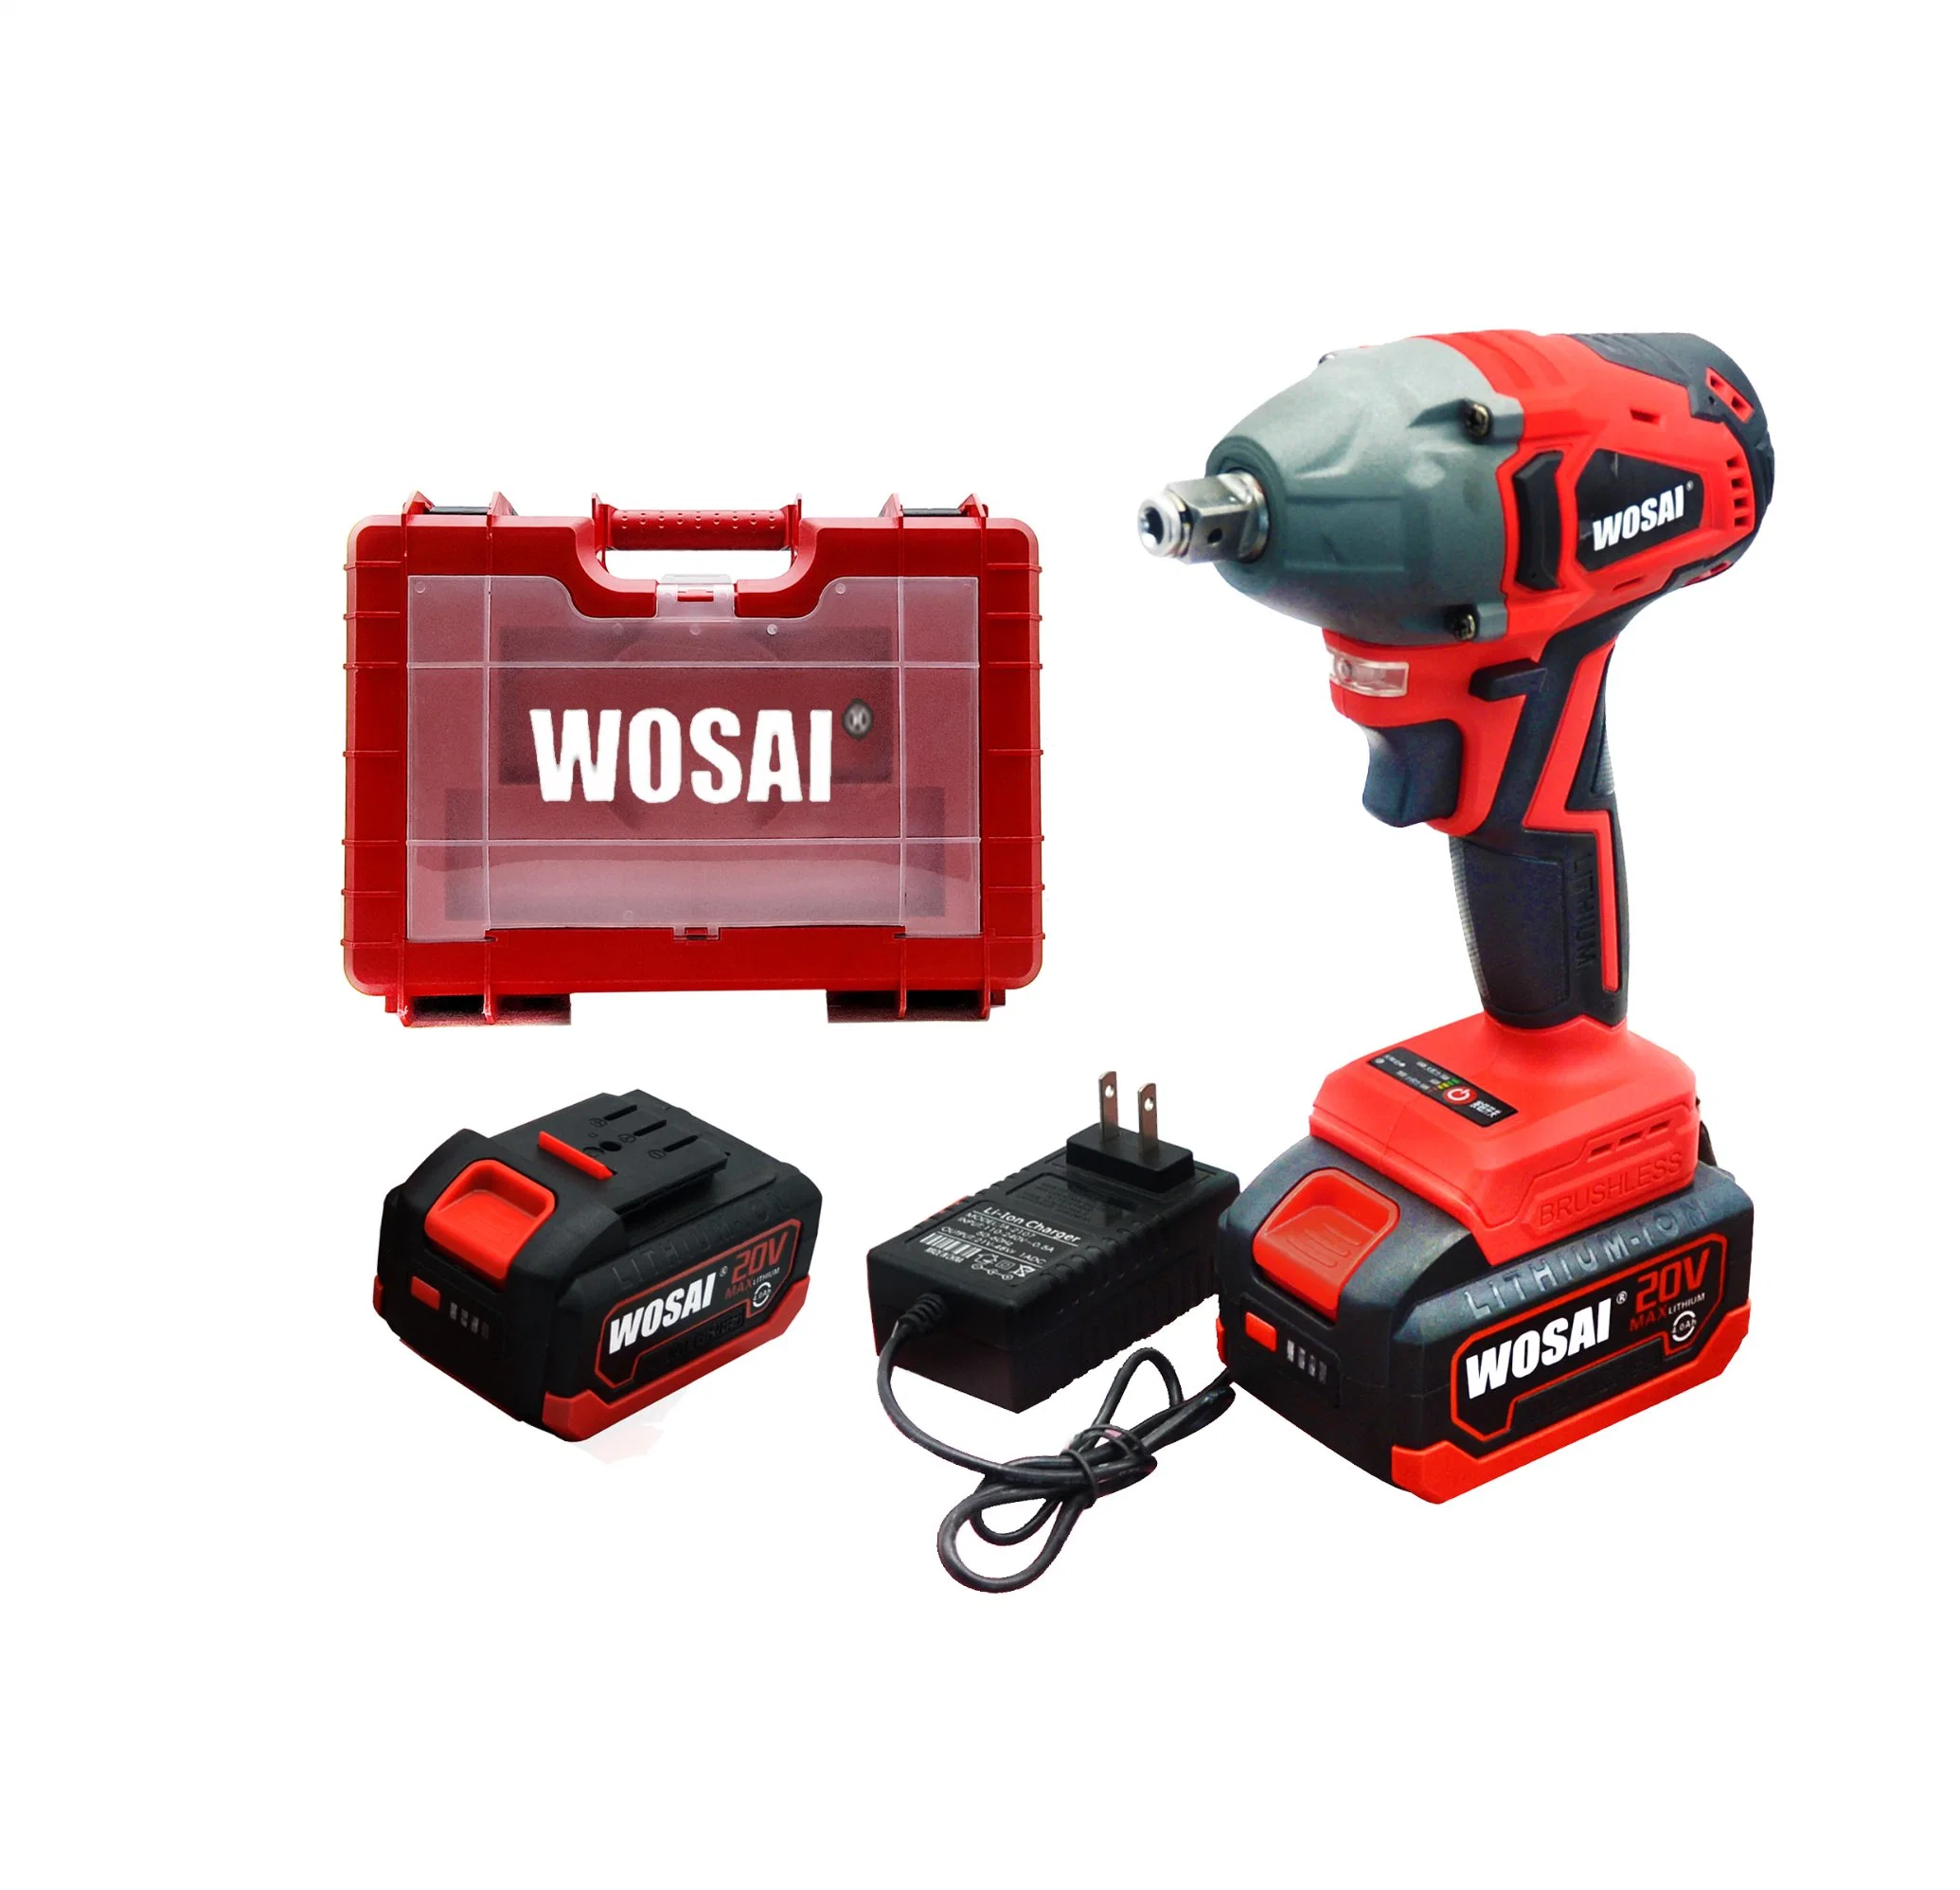 350nm 20V Wosai Battery Tools Cordless Electric Impact Wrench Socket Wrench Set